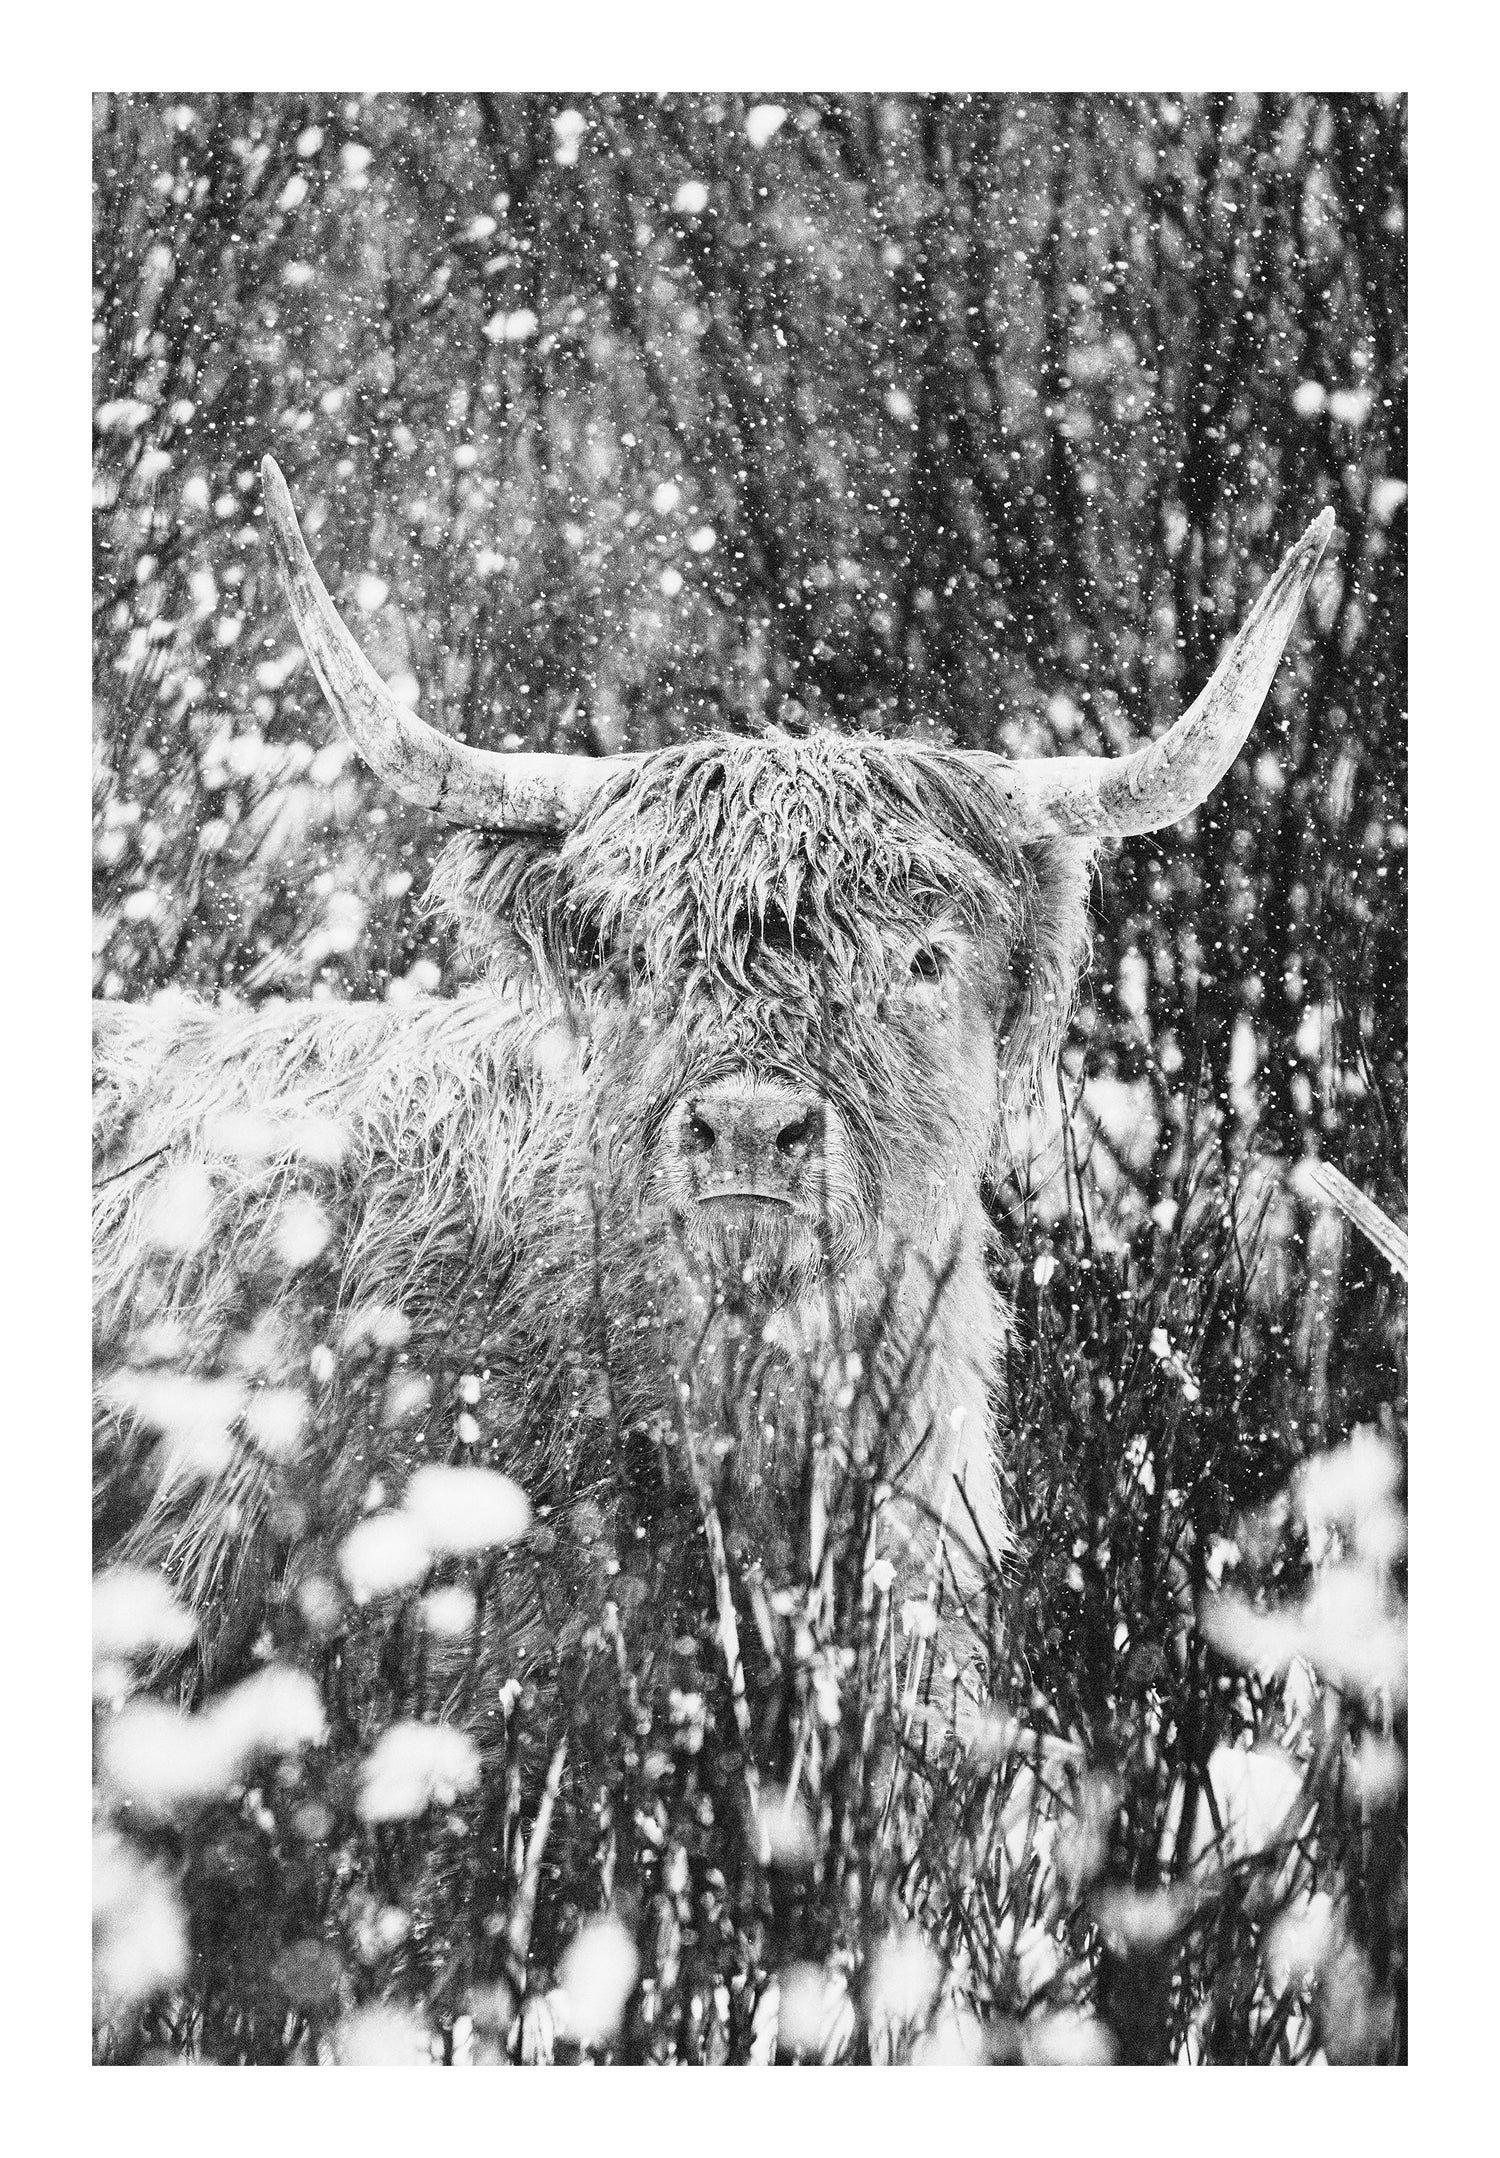 "Winston" shaggy highland cow in black and white.